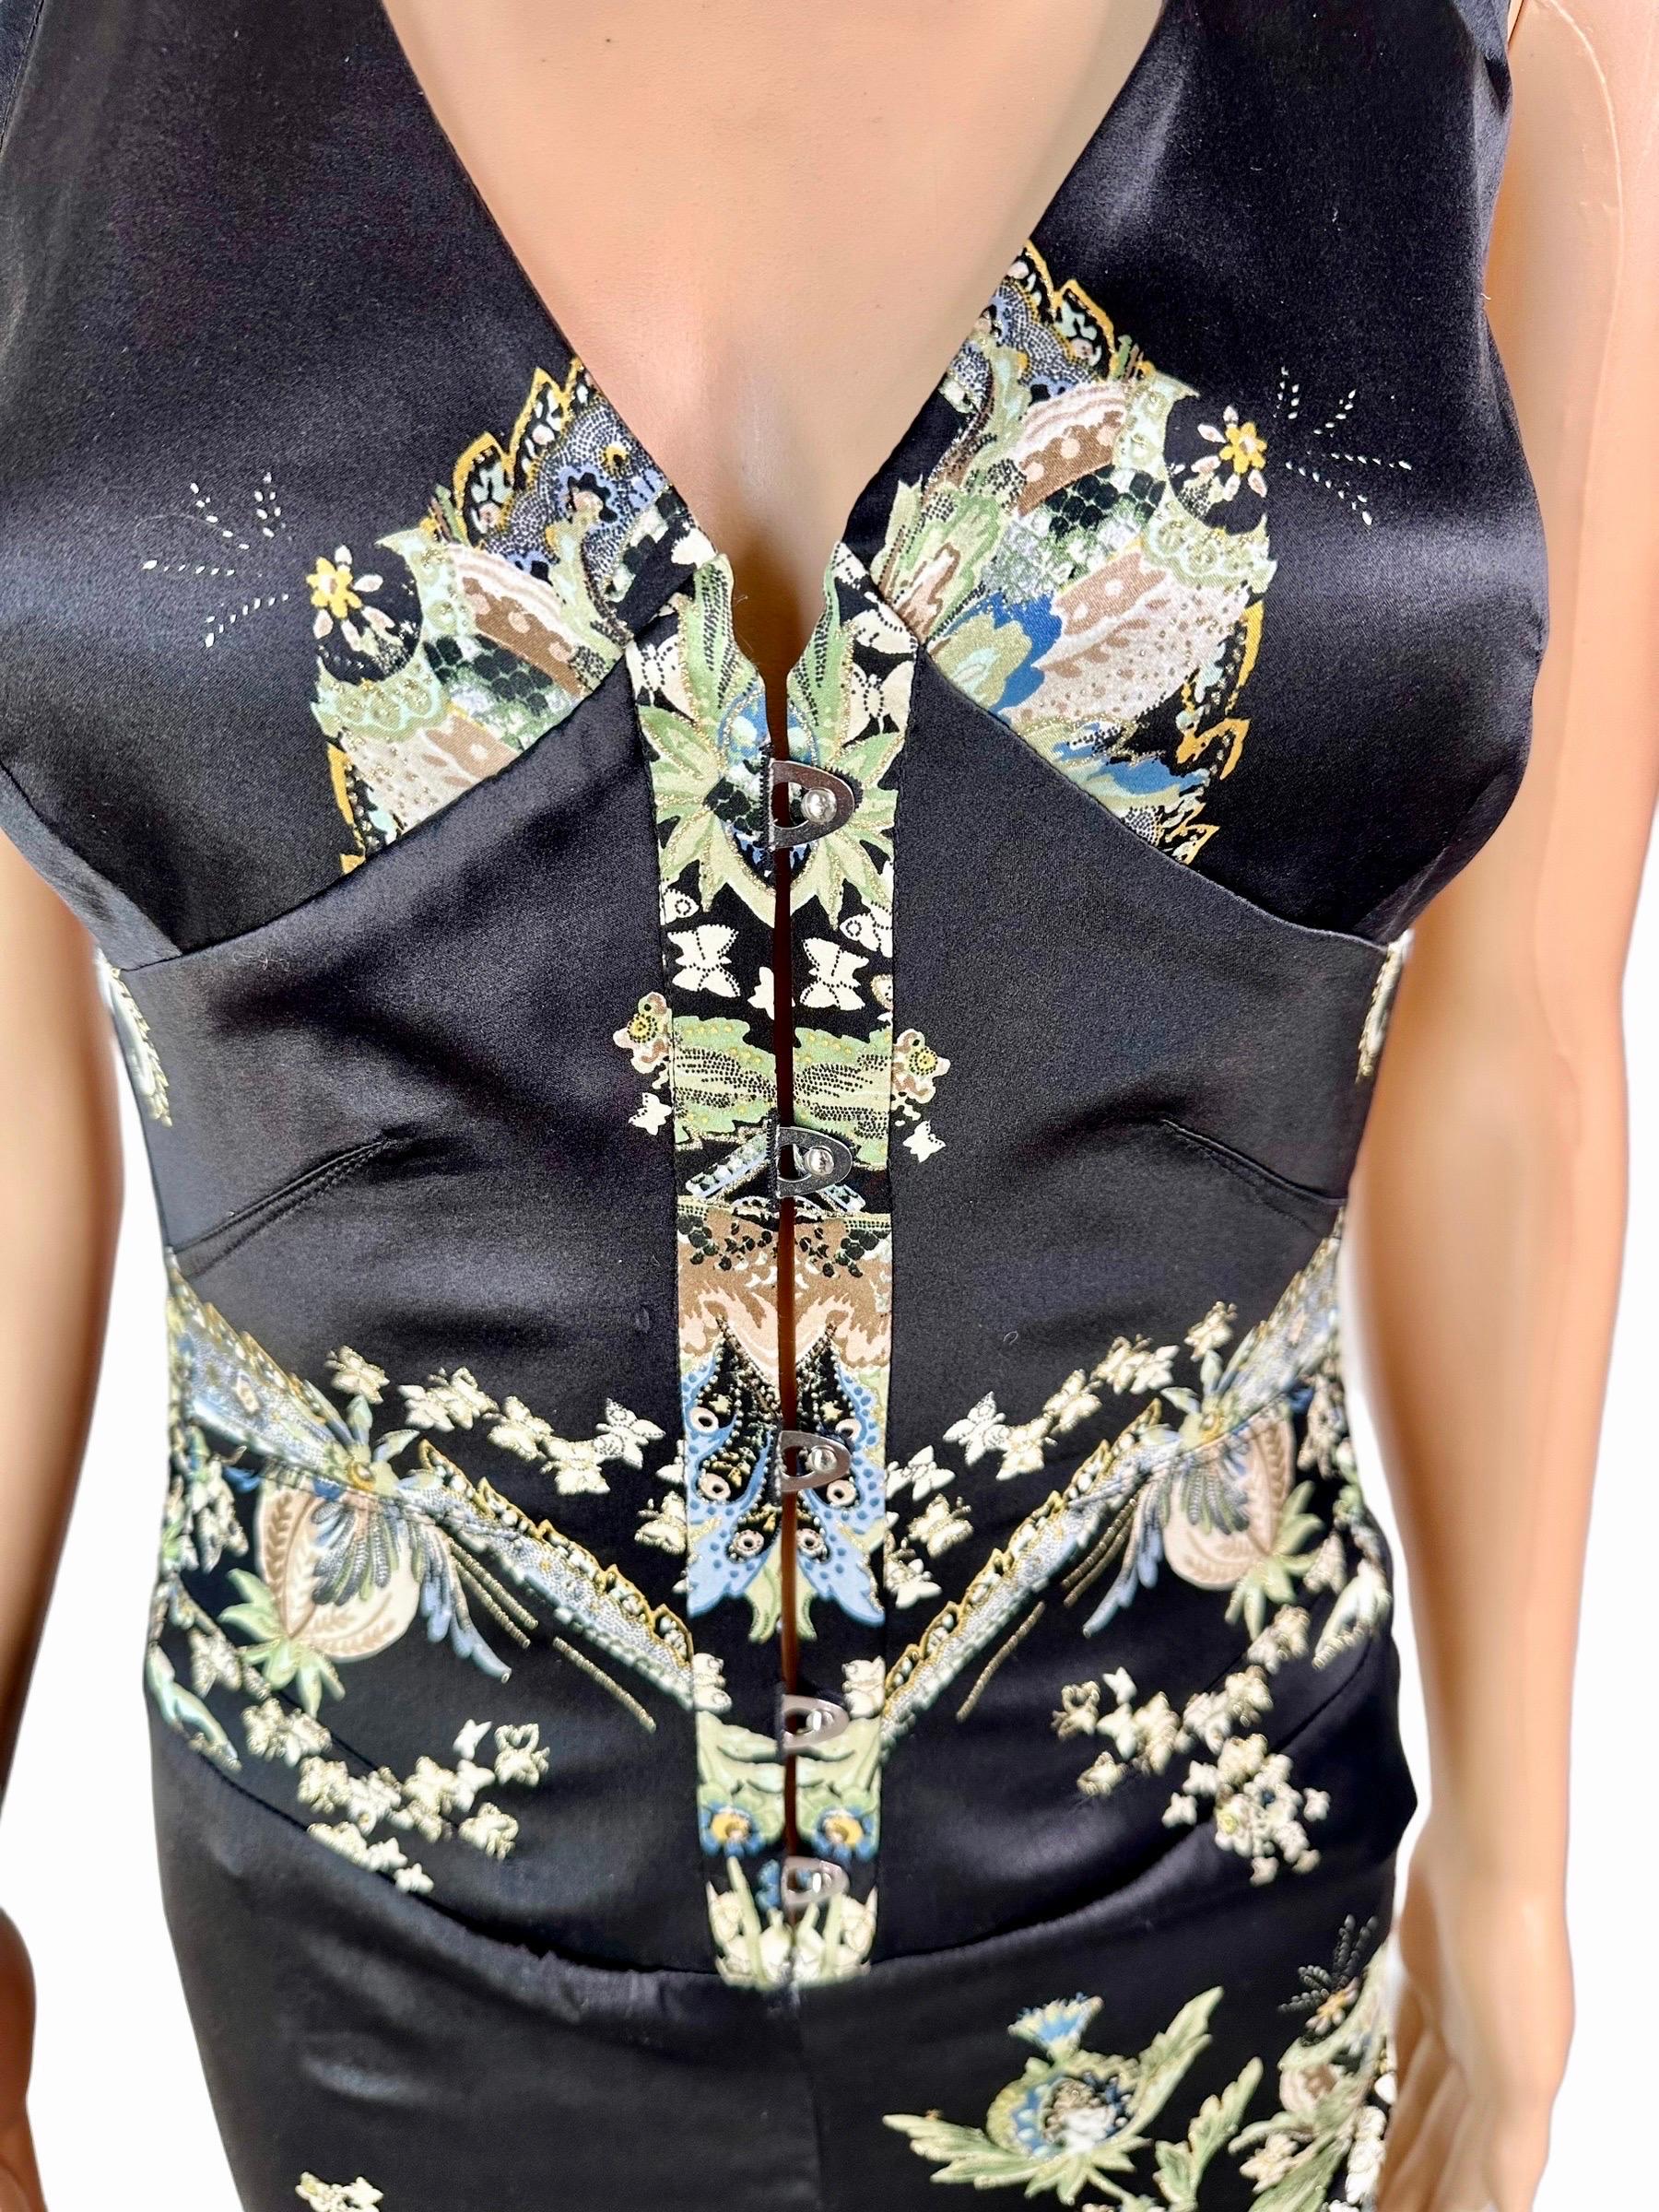 Roberto Cavalli S/S 2003 Corset Lace Up Chinoiserie Print Silk Asymmetric Dress In Good Condition For Sale In Naples, FL